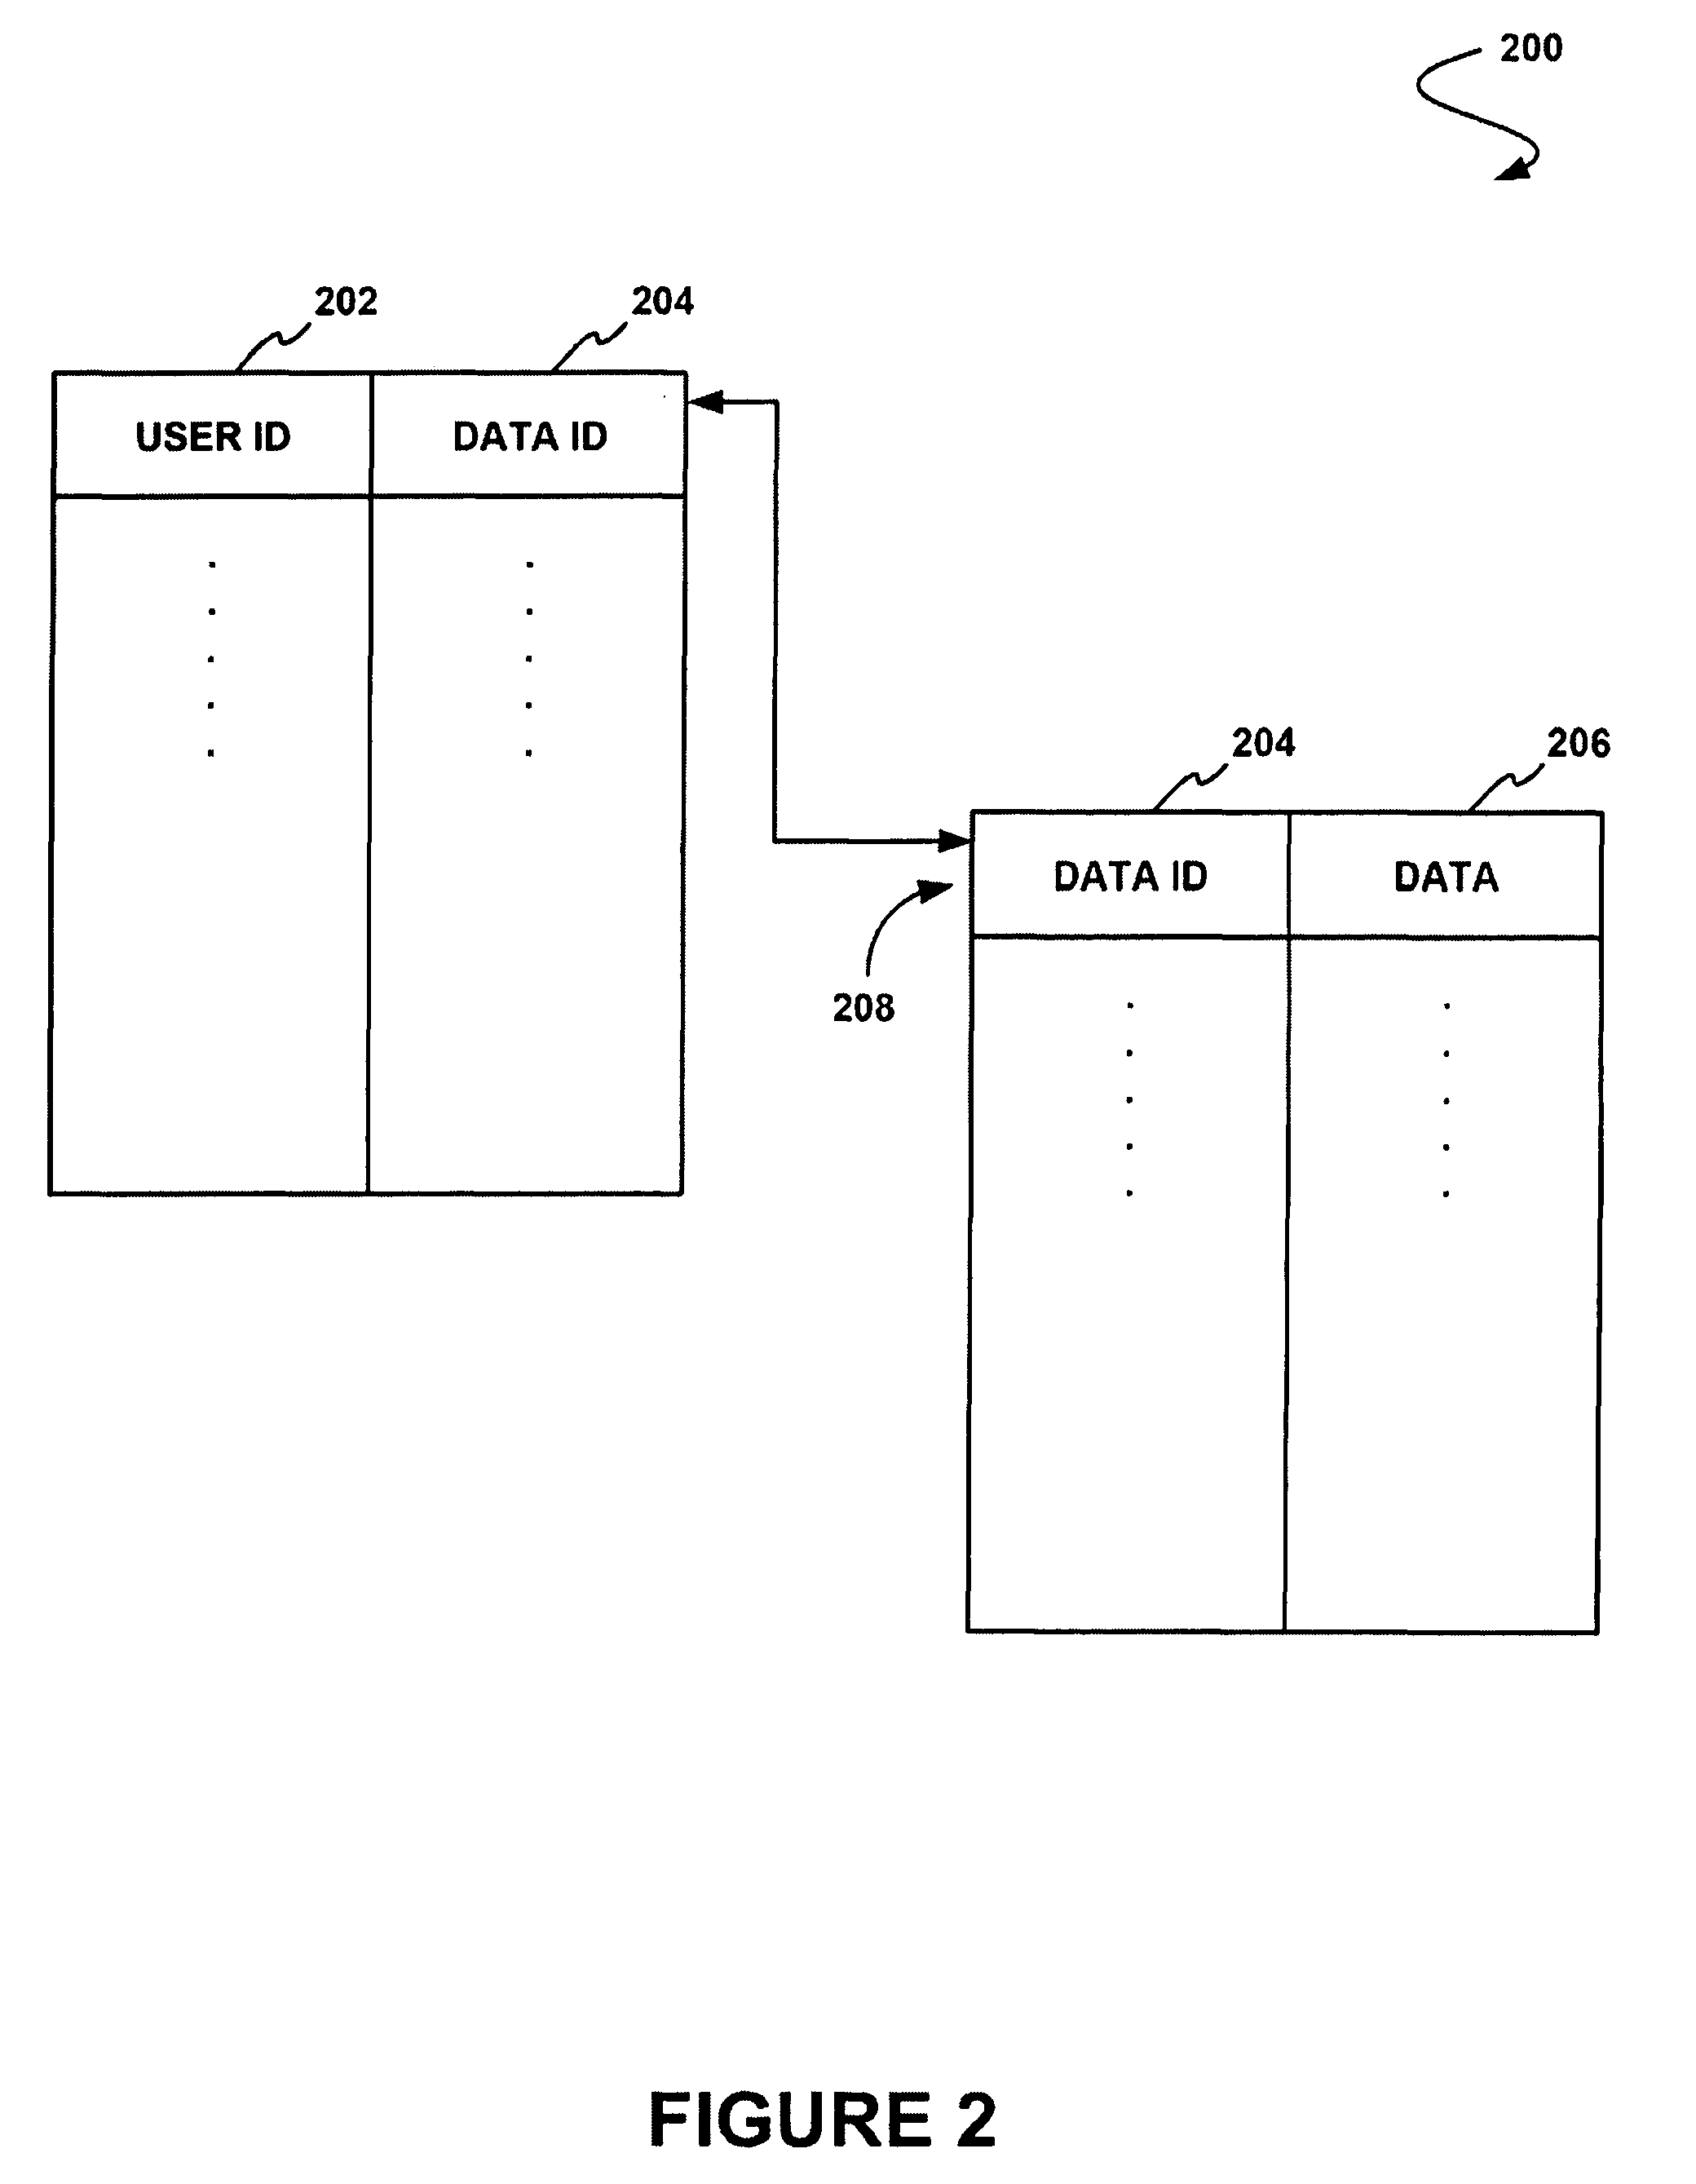 Method and system for synchronizing a server and an on-demand database service